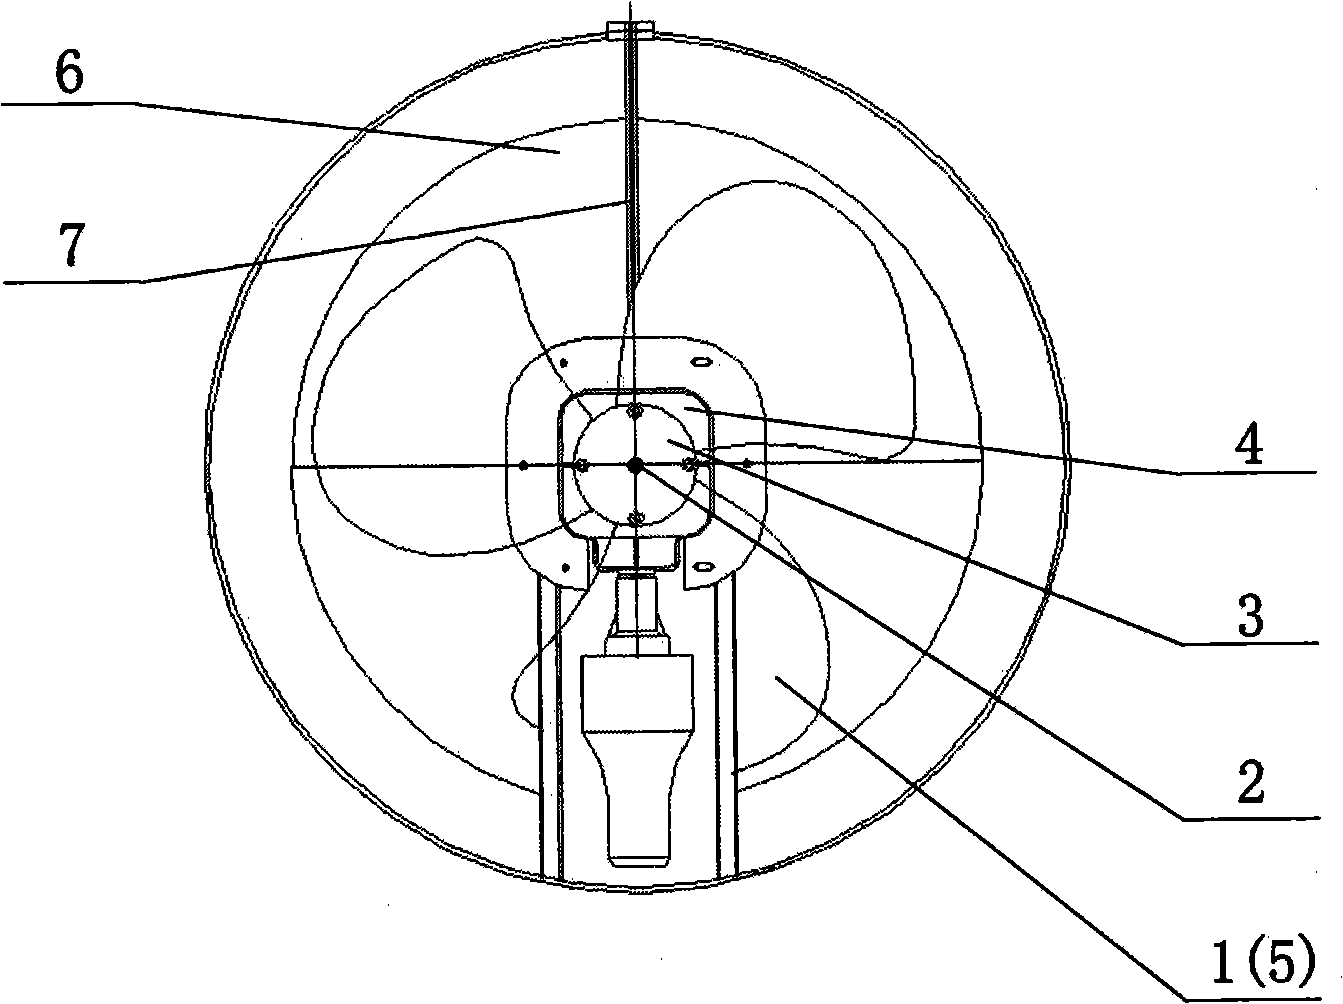 Electric fan constructional device for blowing simultaneously in positive and negative directions